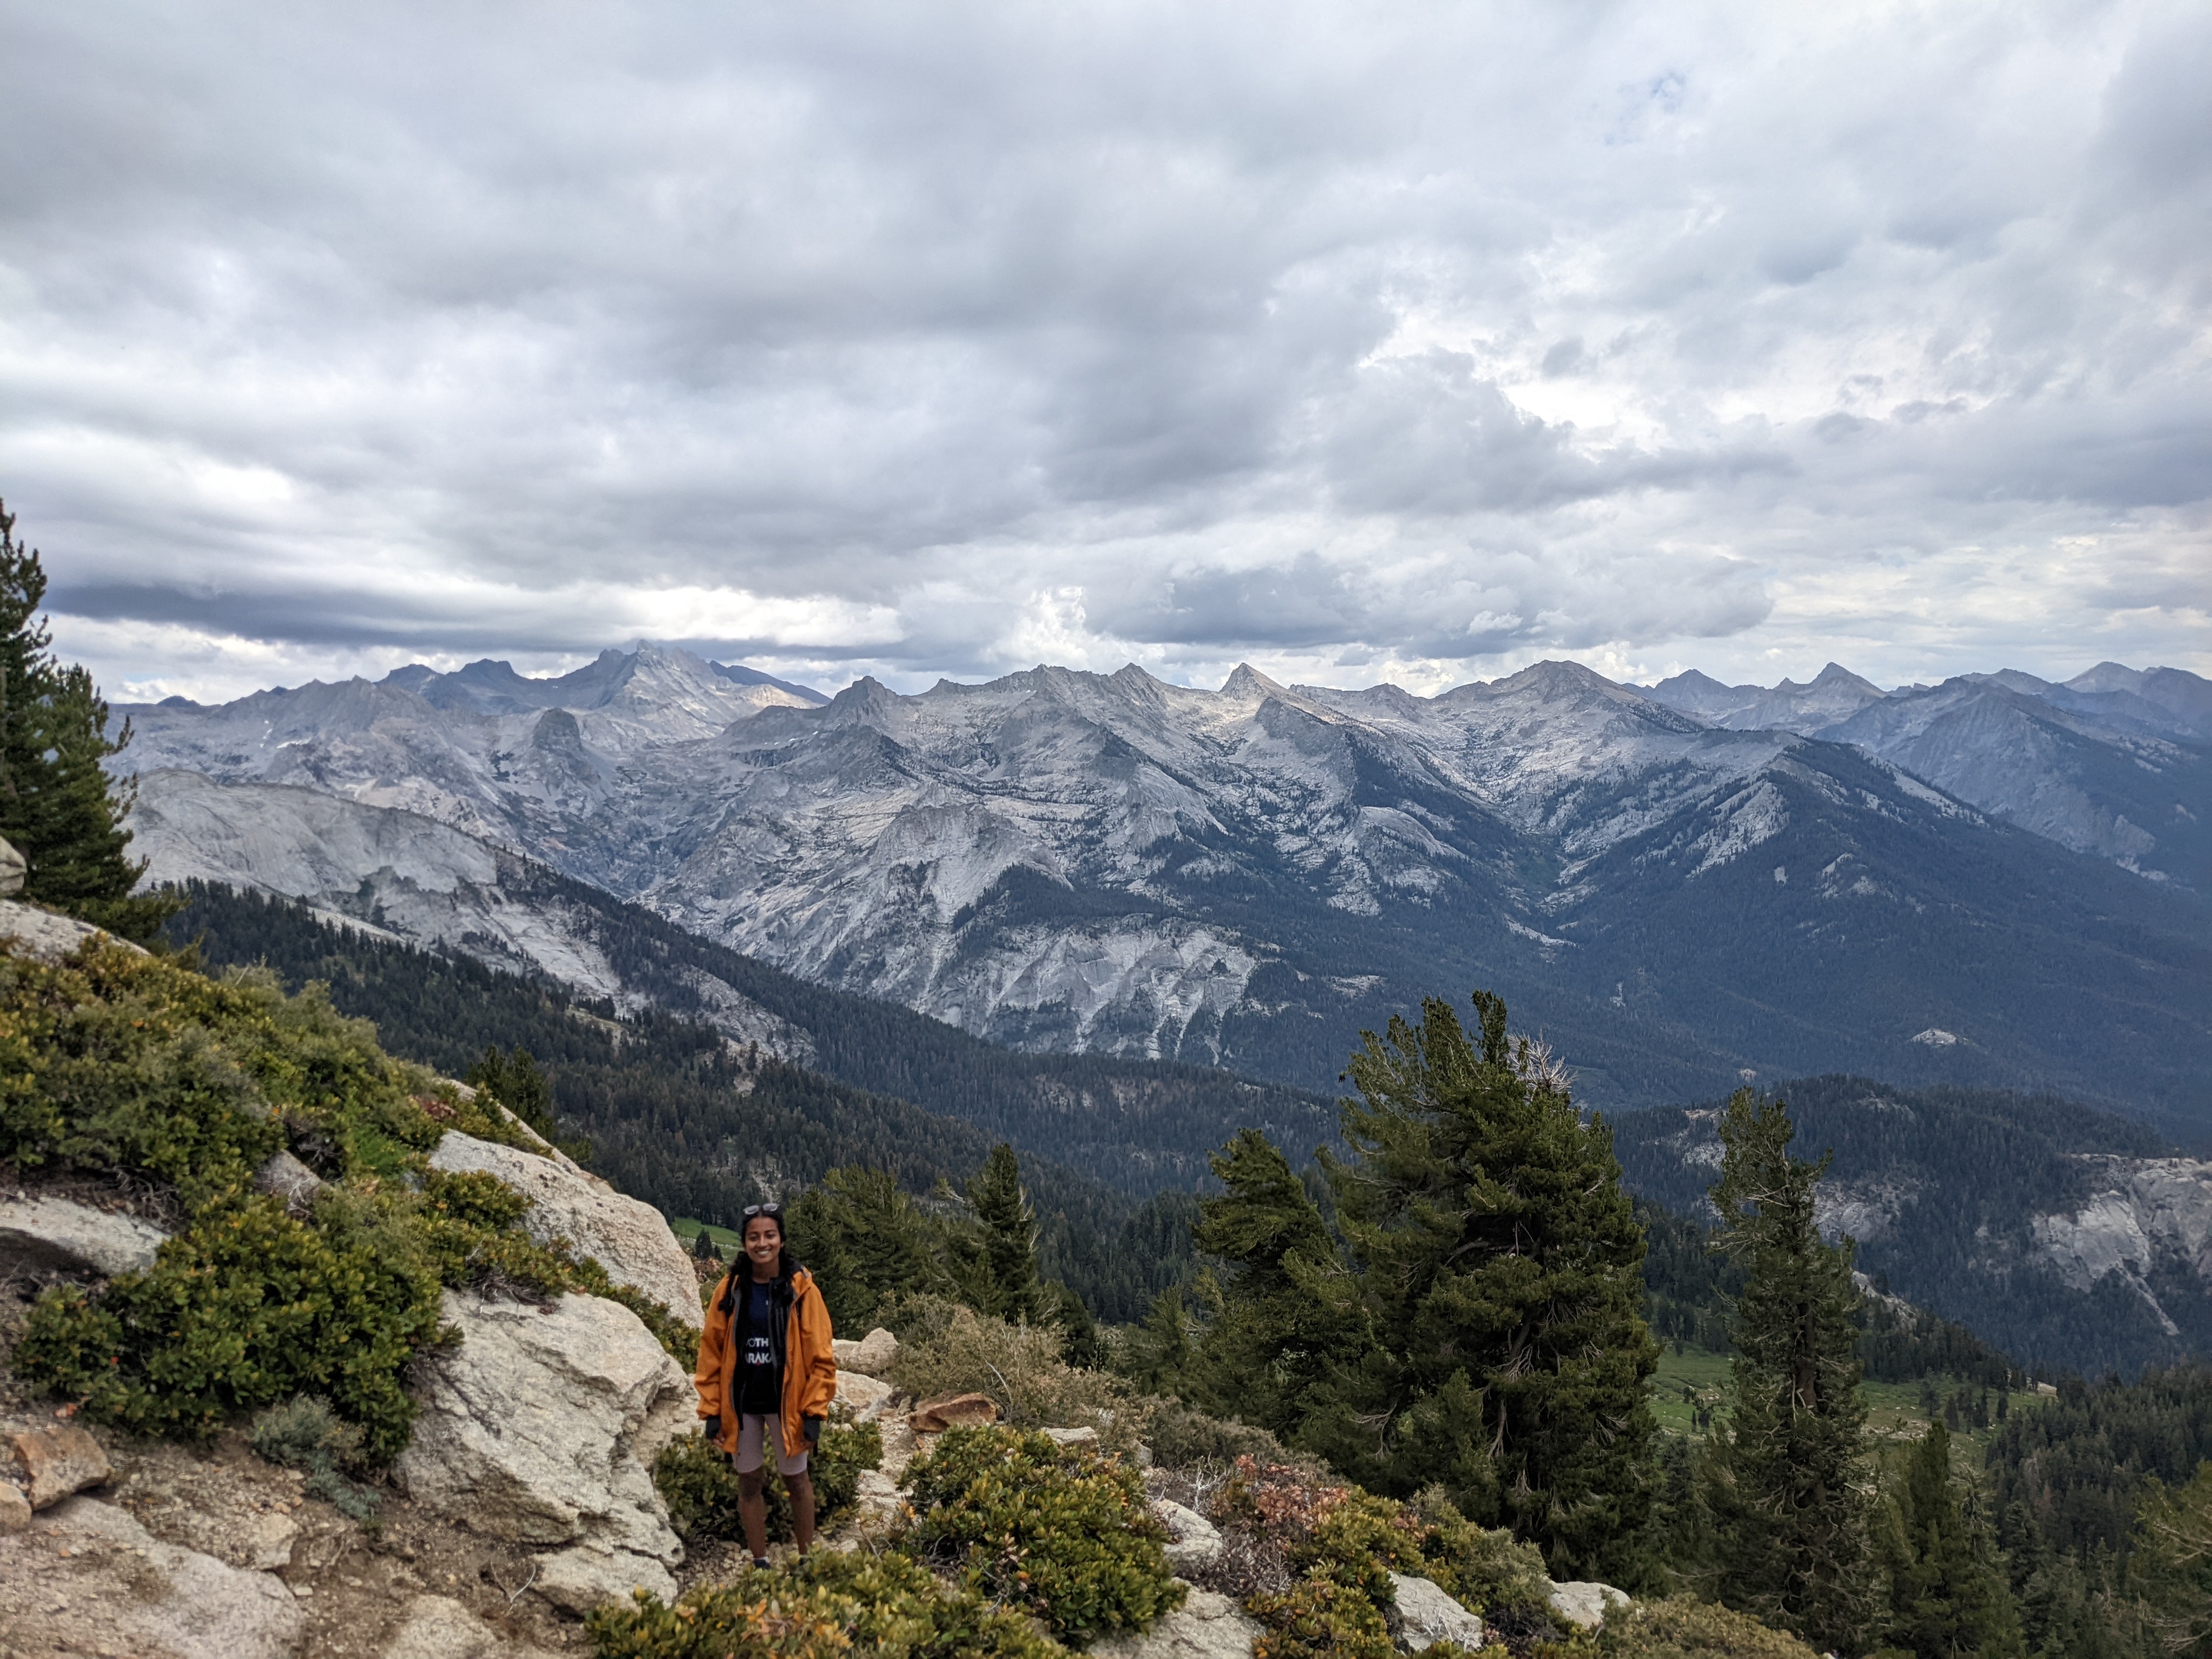 Hiking up to Alta Peak in Sequoia National Park.